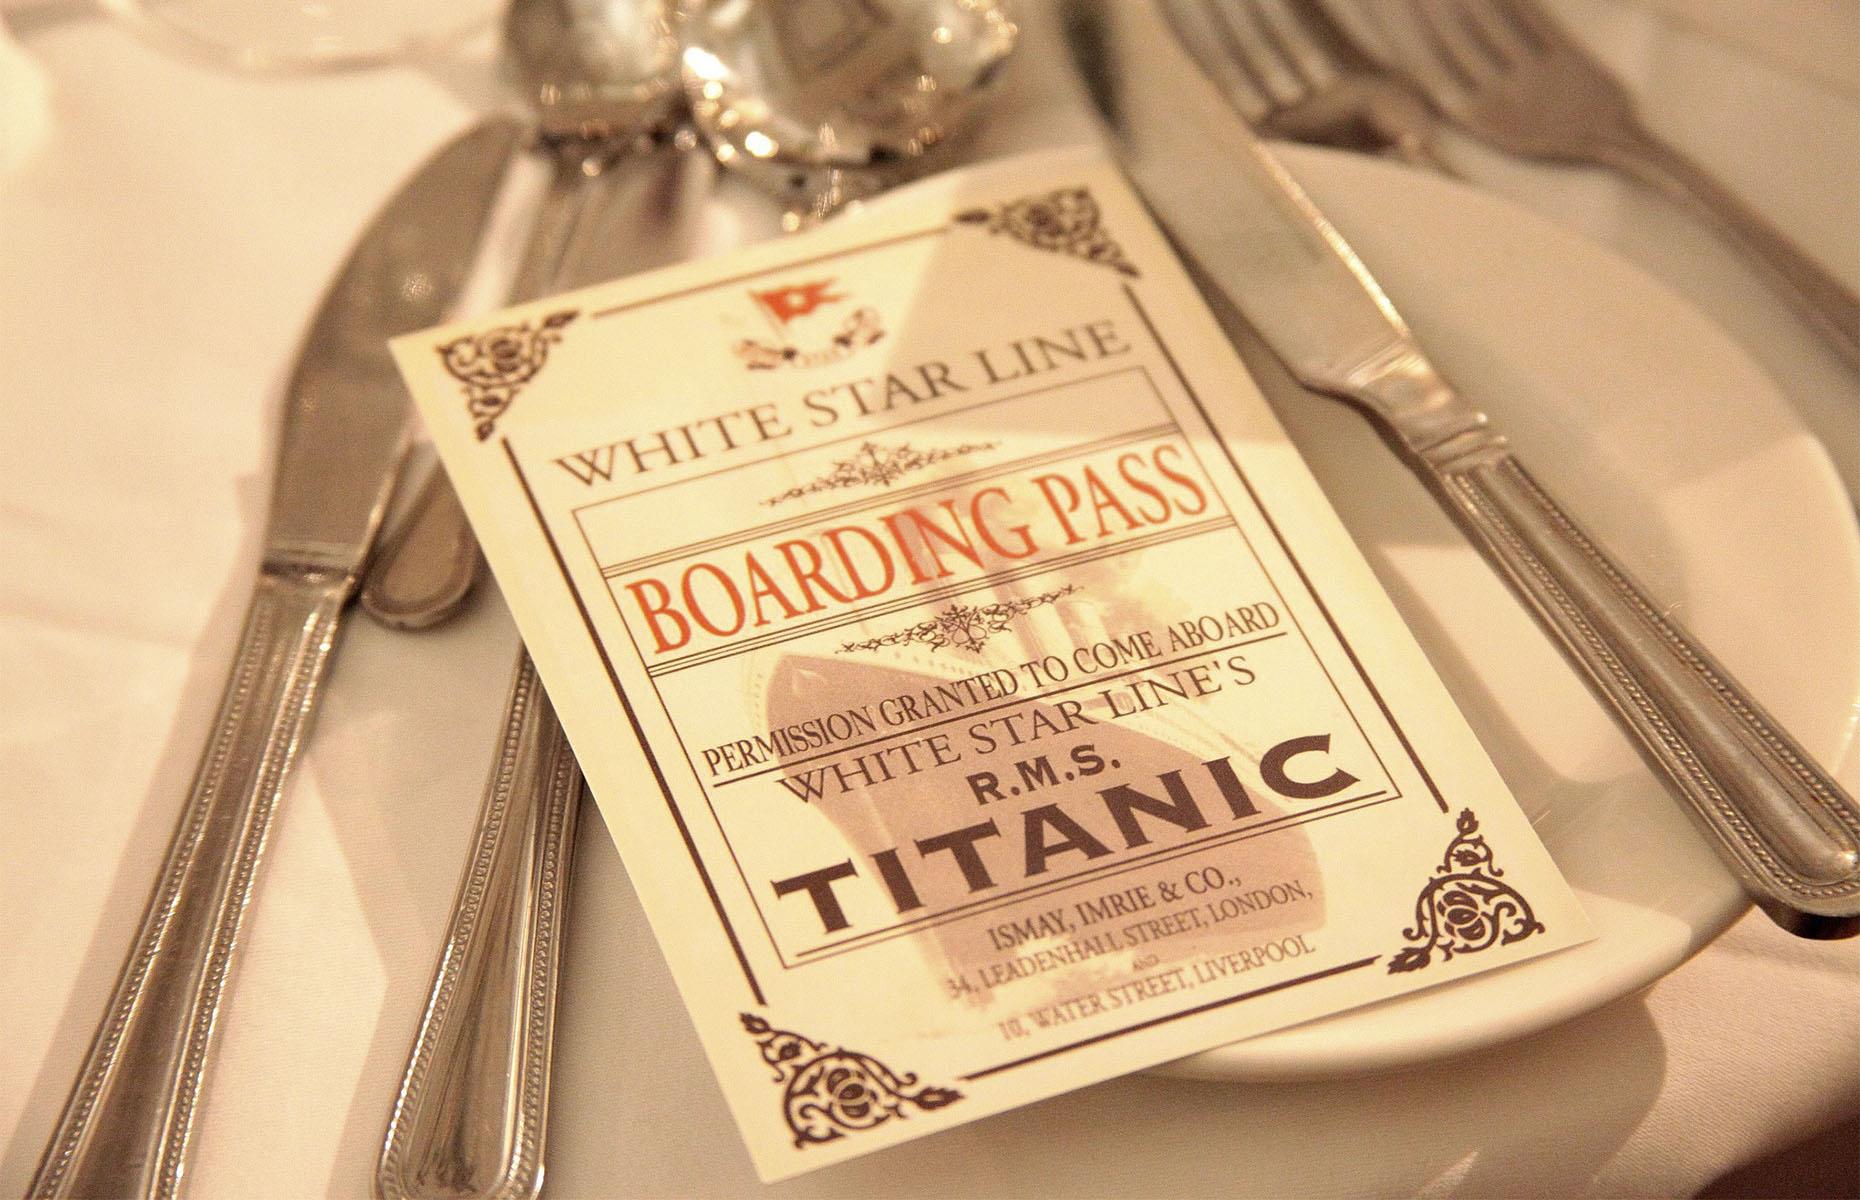 <p>Rayanne House in Belfast, Northern Ireland, (where the Titanic was built) usually offers a <a href="https://www.rayannehouse.com/titanic-menu/view-the-titanic-menu">nine-course Titanic menu</a> inspired by what first-class passengers would have eaten. Courses include poached salmon with mousseline sauce, filet mignon with foie gras and truffle, and spiced peaches in Chartreuse jelly.</p>  <p><strong>Read more: <a href="https://www.lovefood.com/gallerylist/77539/incredible-menus-served-on-the-high-seas-during-the-golden-age-of-travel">Incredible menus served on the high seas during the golden age of travel</a></strong></p>